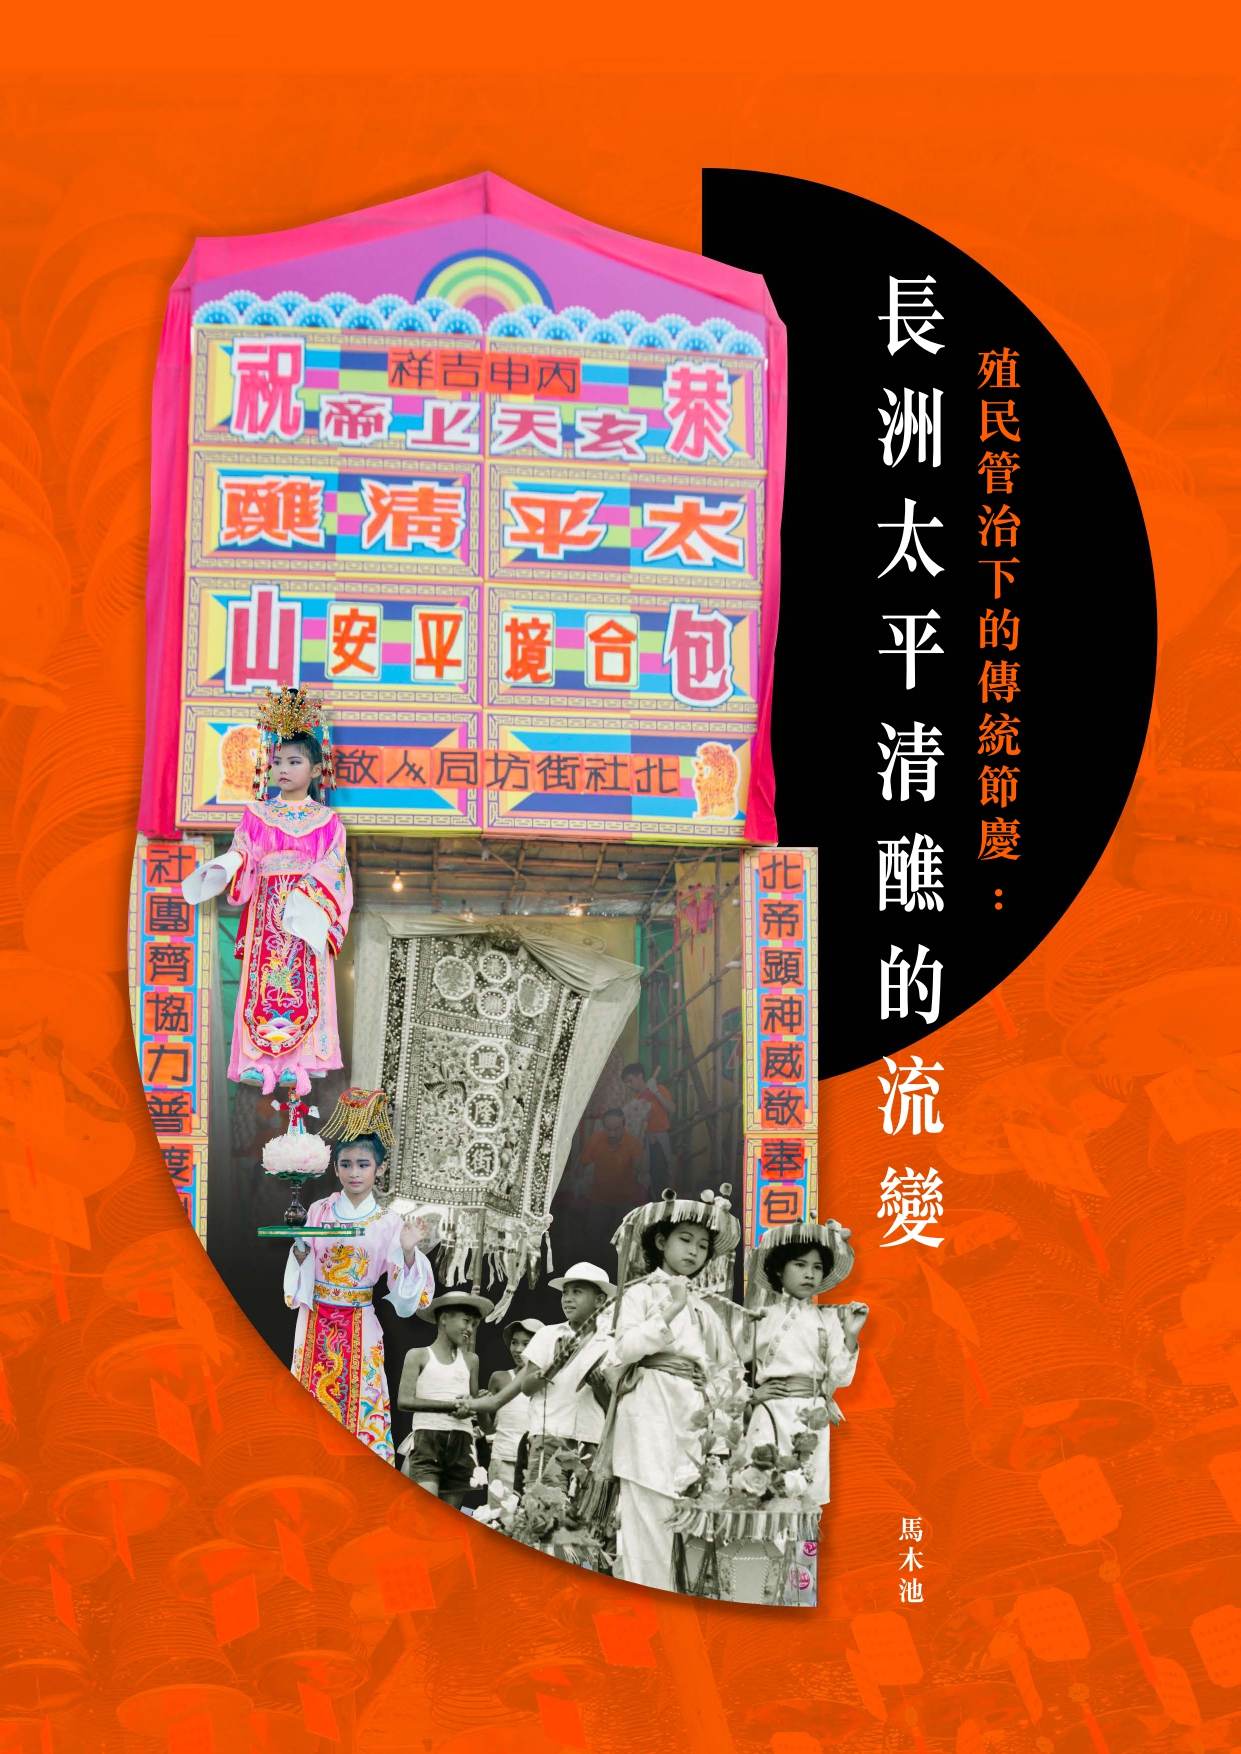 Traditional Festivals under Colonial Governance: The Historical Changes of Cheung Chau Jiao Festival